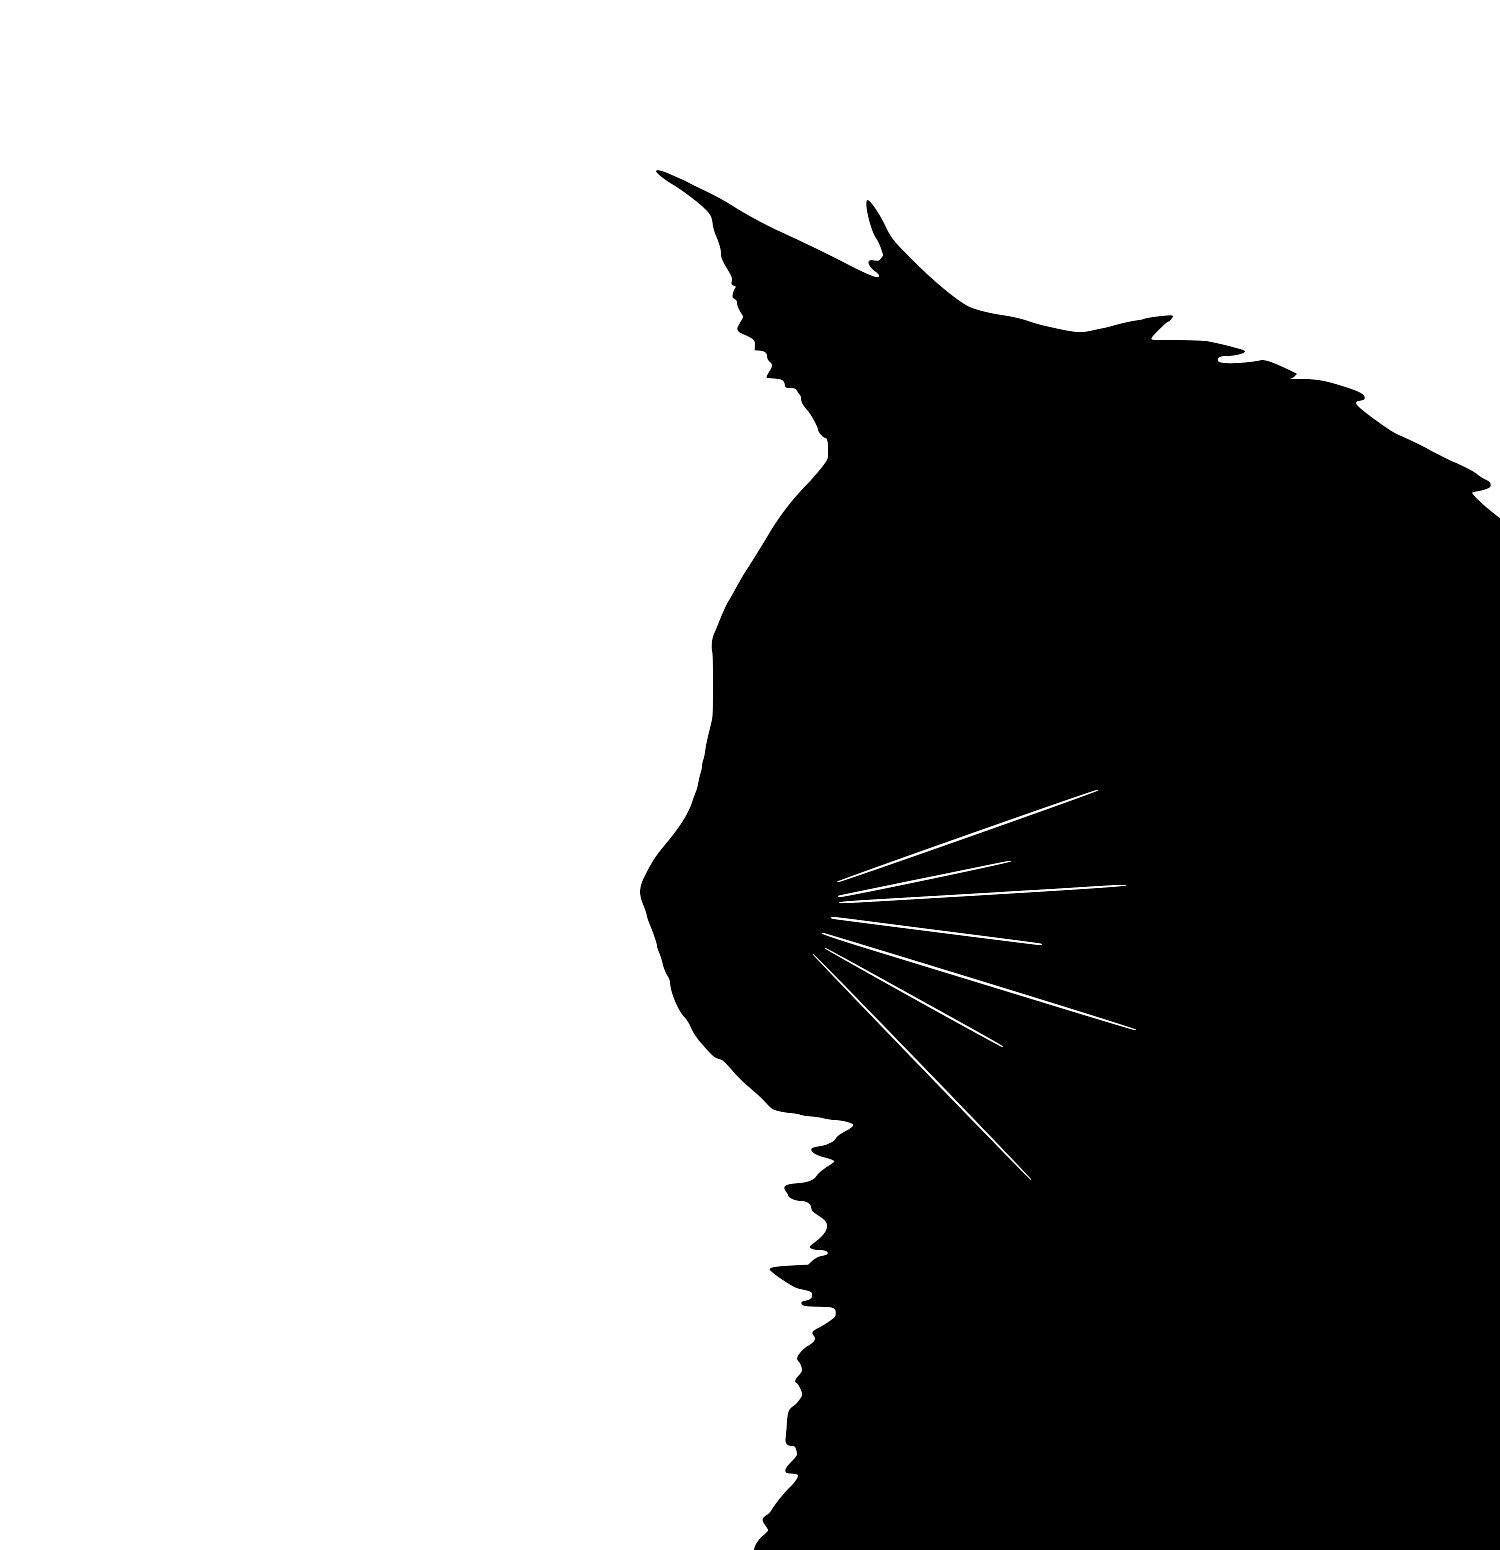 Maine Coon Cat Silhouette Svg Clipart Mainecoon Kitten Vector Etsy My